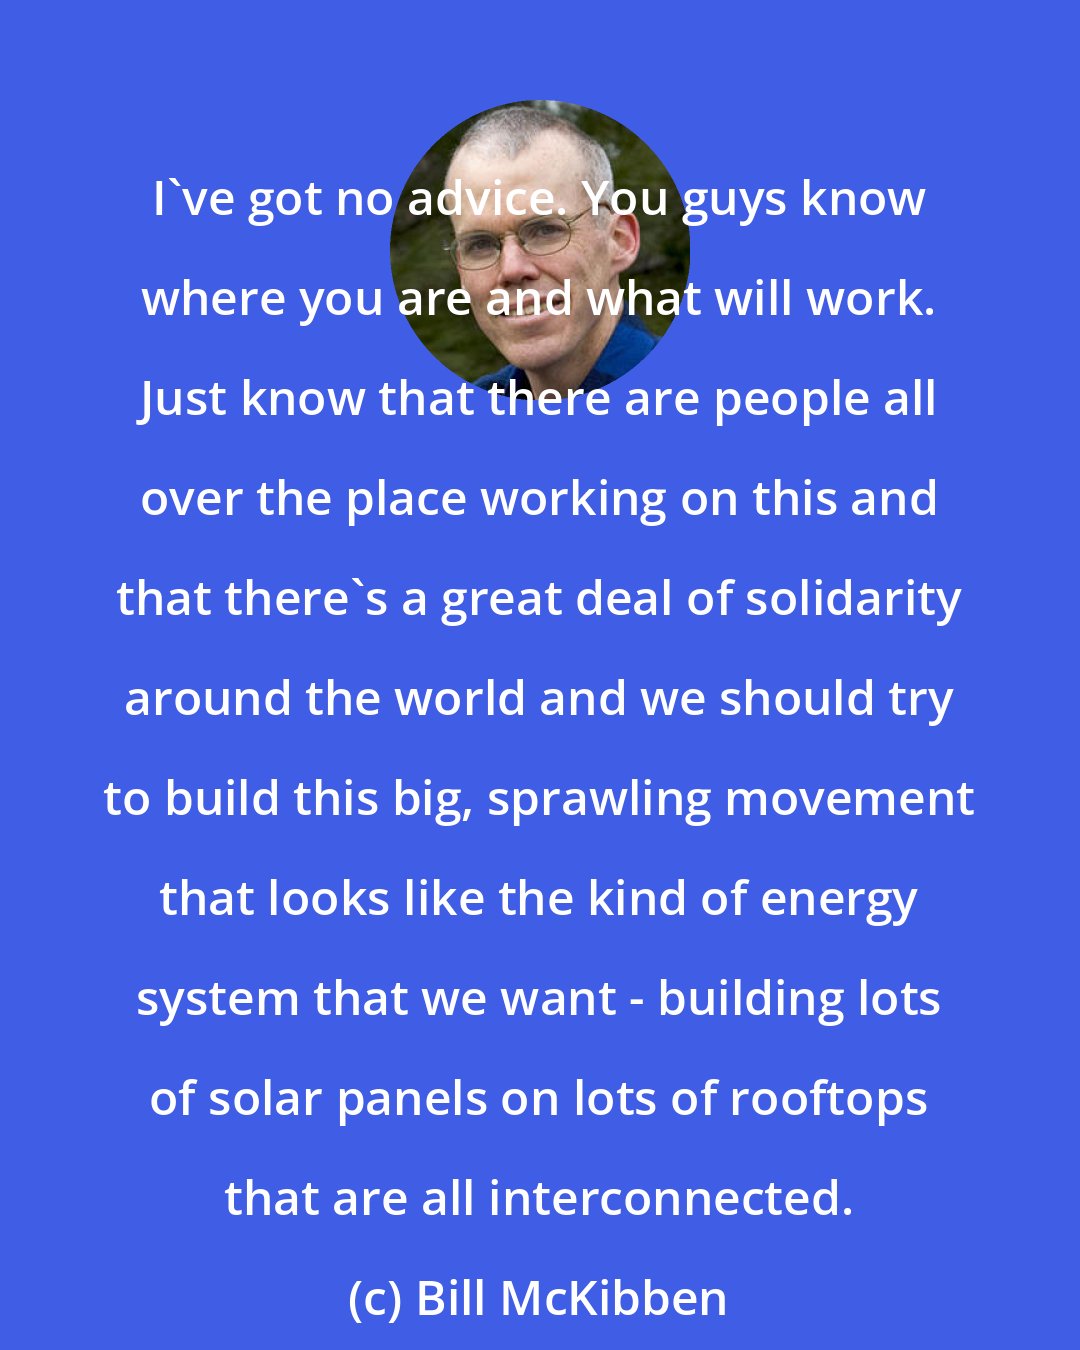 Bill McKibben: I've got no advice. You guys know where you are and what will work. Just know that there are people all over the place working on this and that there's a great deal of solidarity around the world and we should try to build this big, sprawling movement that looks like the kind of energy system that we want - building lots of solar panels on lots of rooftops that are all interconnected.